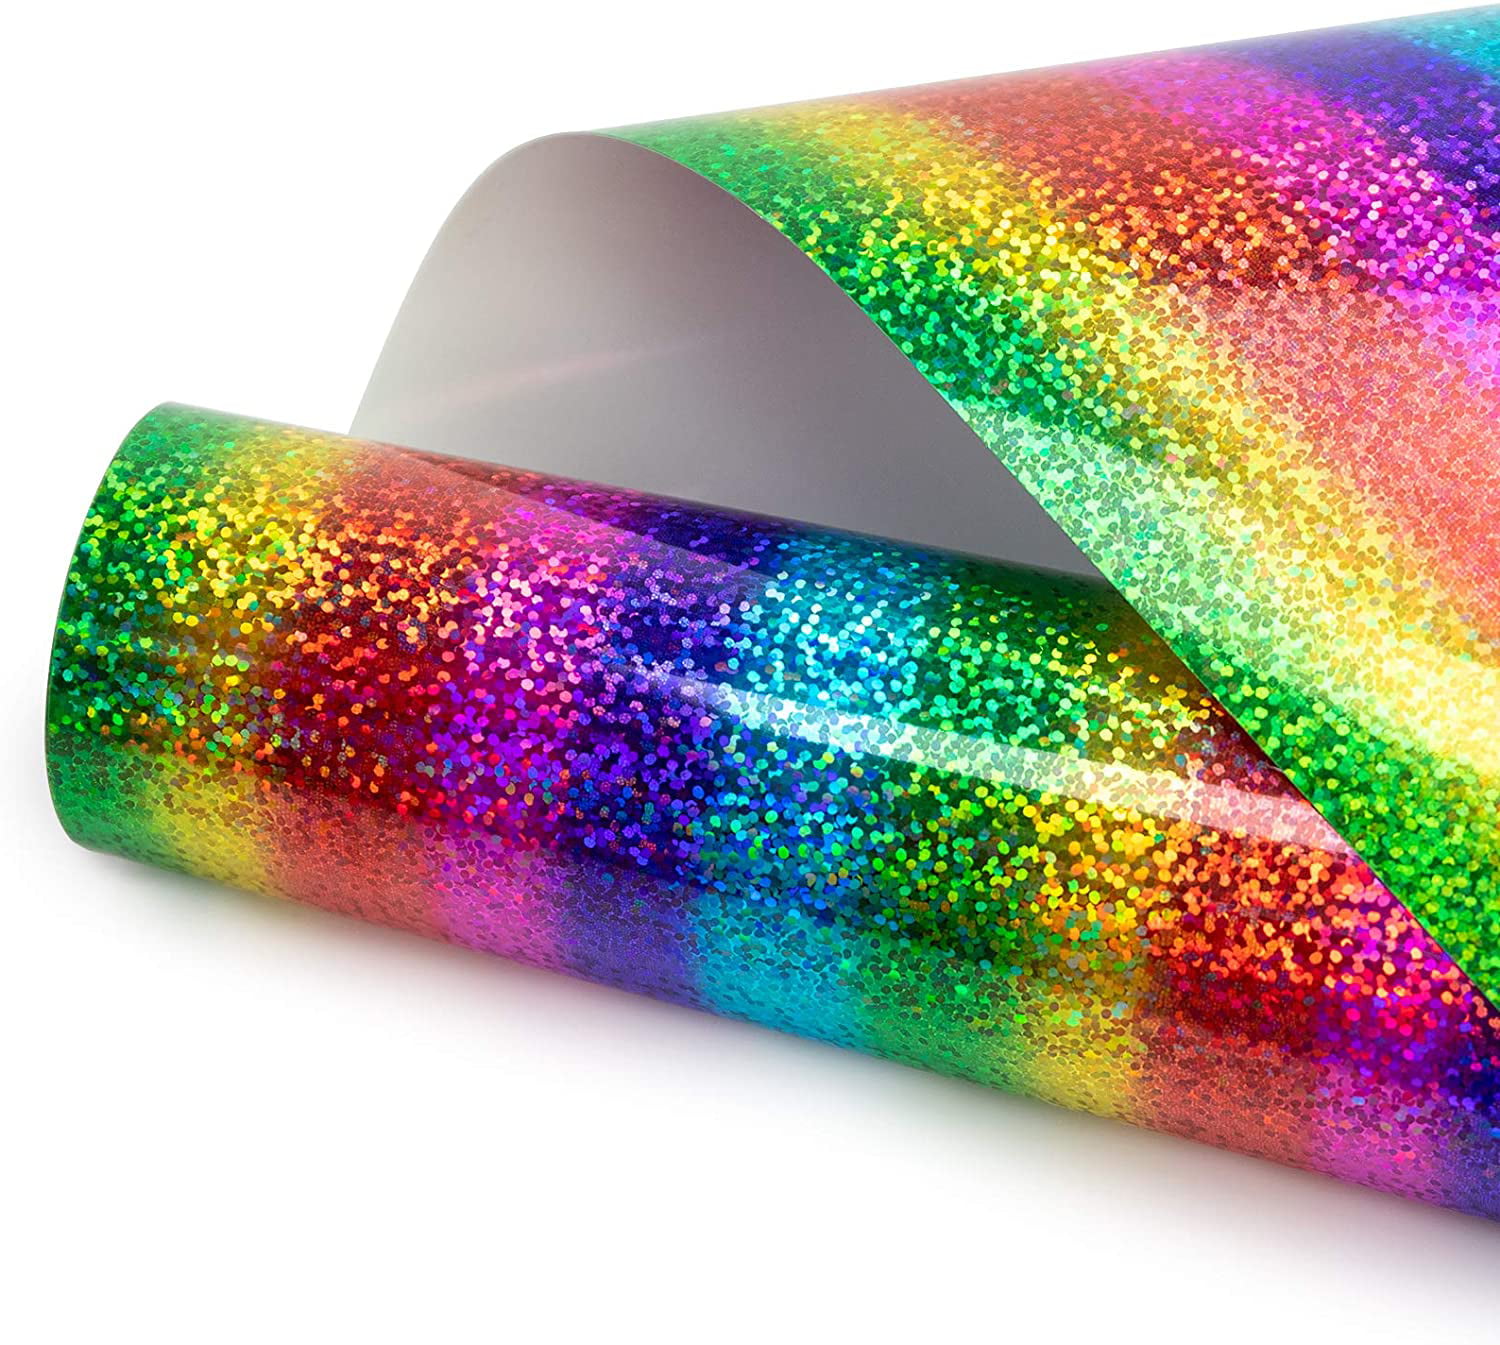 Crystal Gold 、Crystal Silver Holographic Heat Transfer Vinyl Rainbow Stripe Multi Heat Press Patterned Vinyl for DIY Iron On Clothing and Other Fabric 12x10 6 Sheets/Bundle 